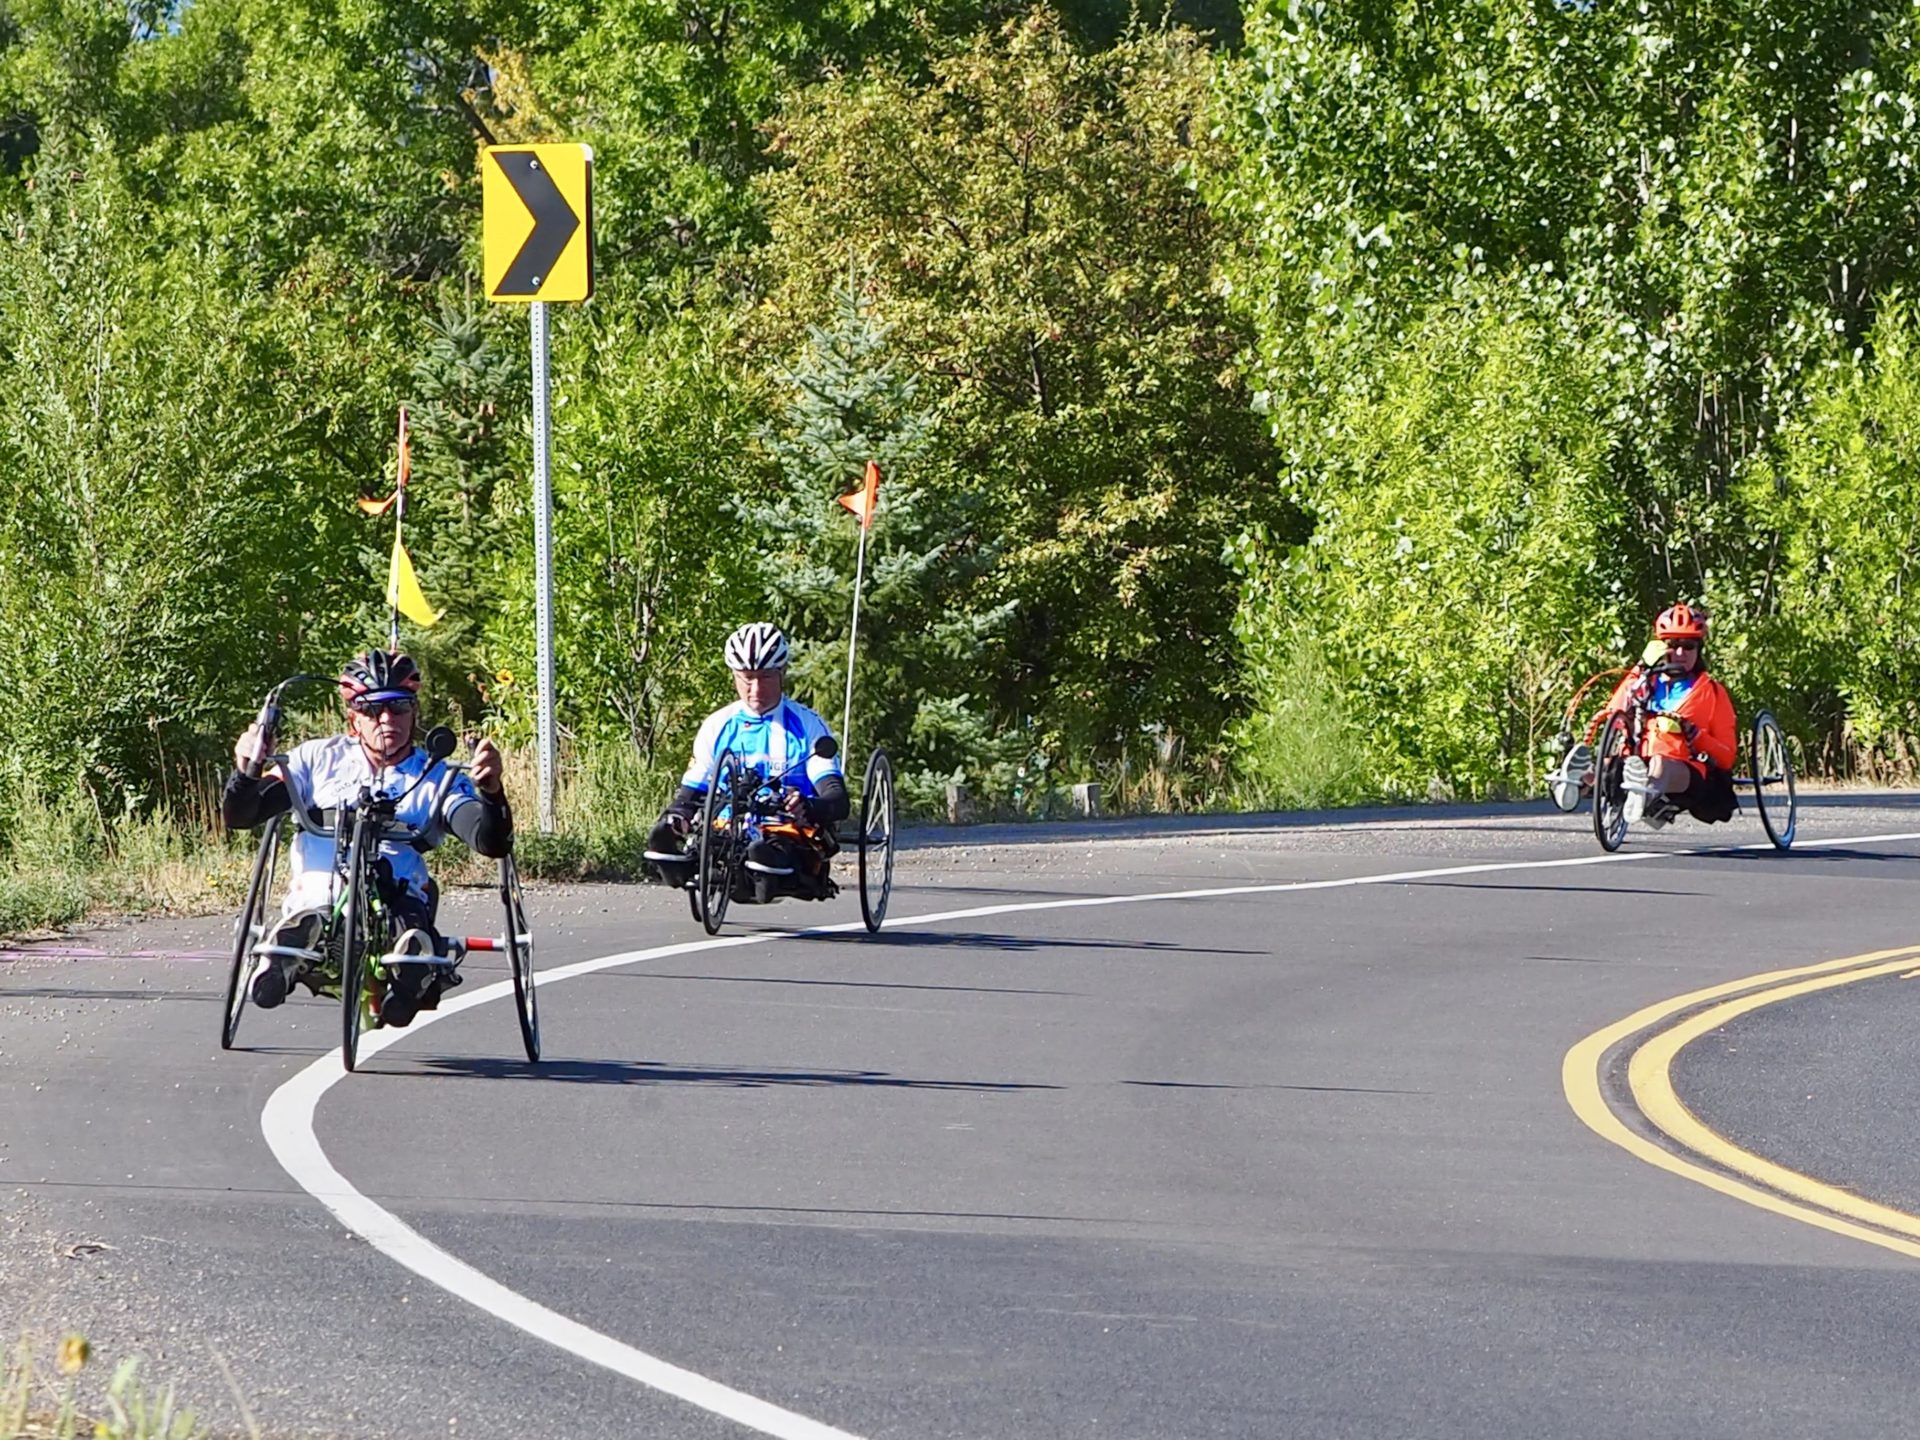 Three people ride recumbent trikes on a paved road. There are green trees behind them.